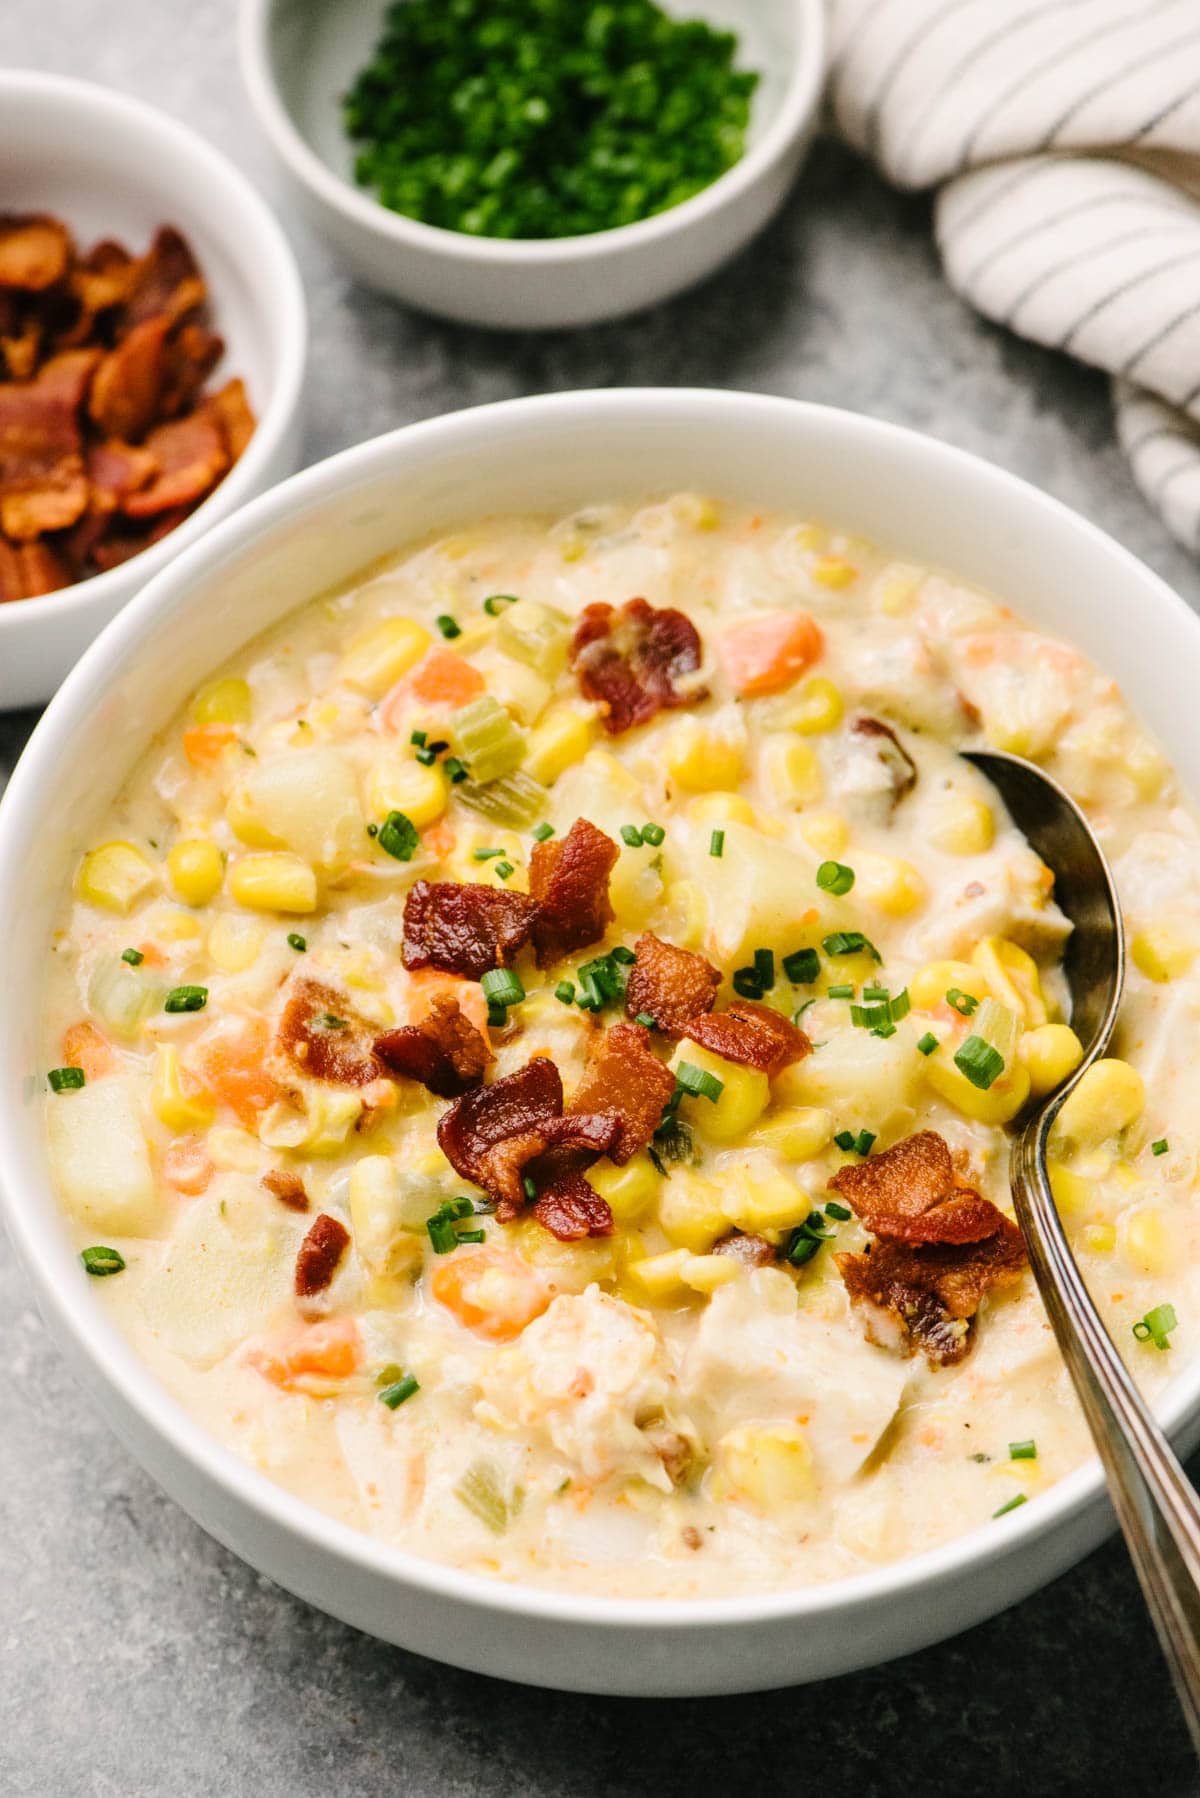 Side view, a spoon tucked into a bowl of turkey corn chowder on a concrete background; small bowls of bacon and chives are in the background, as well as a striped linen napkin.